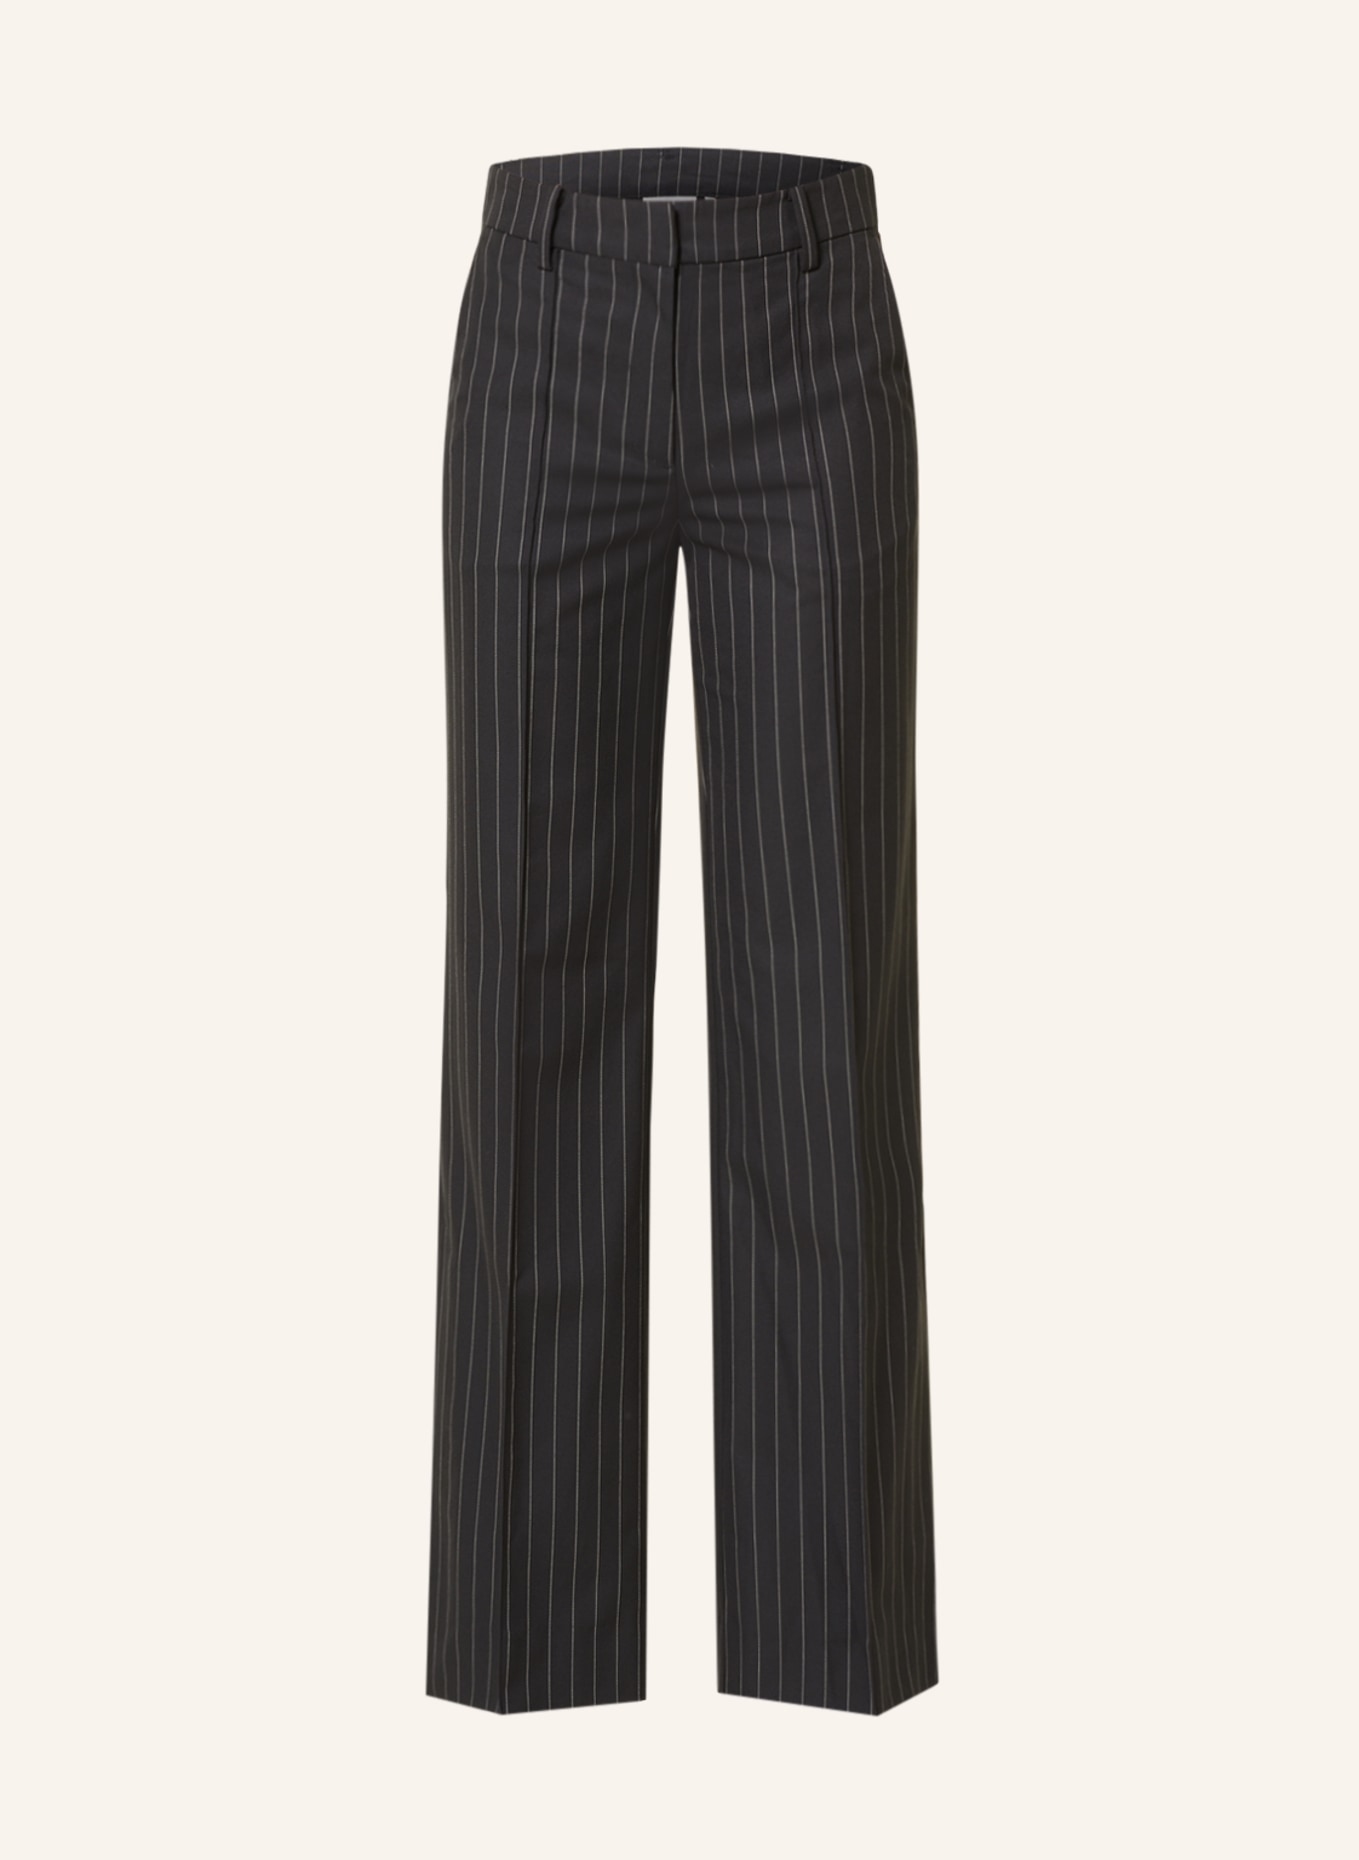 WEEKDAY Trousers KYLIE, Color: DARK GRAY/ WHITE (Image 1)